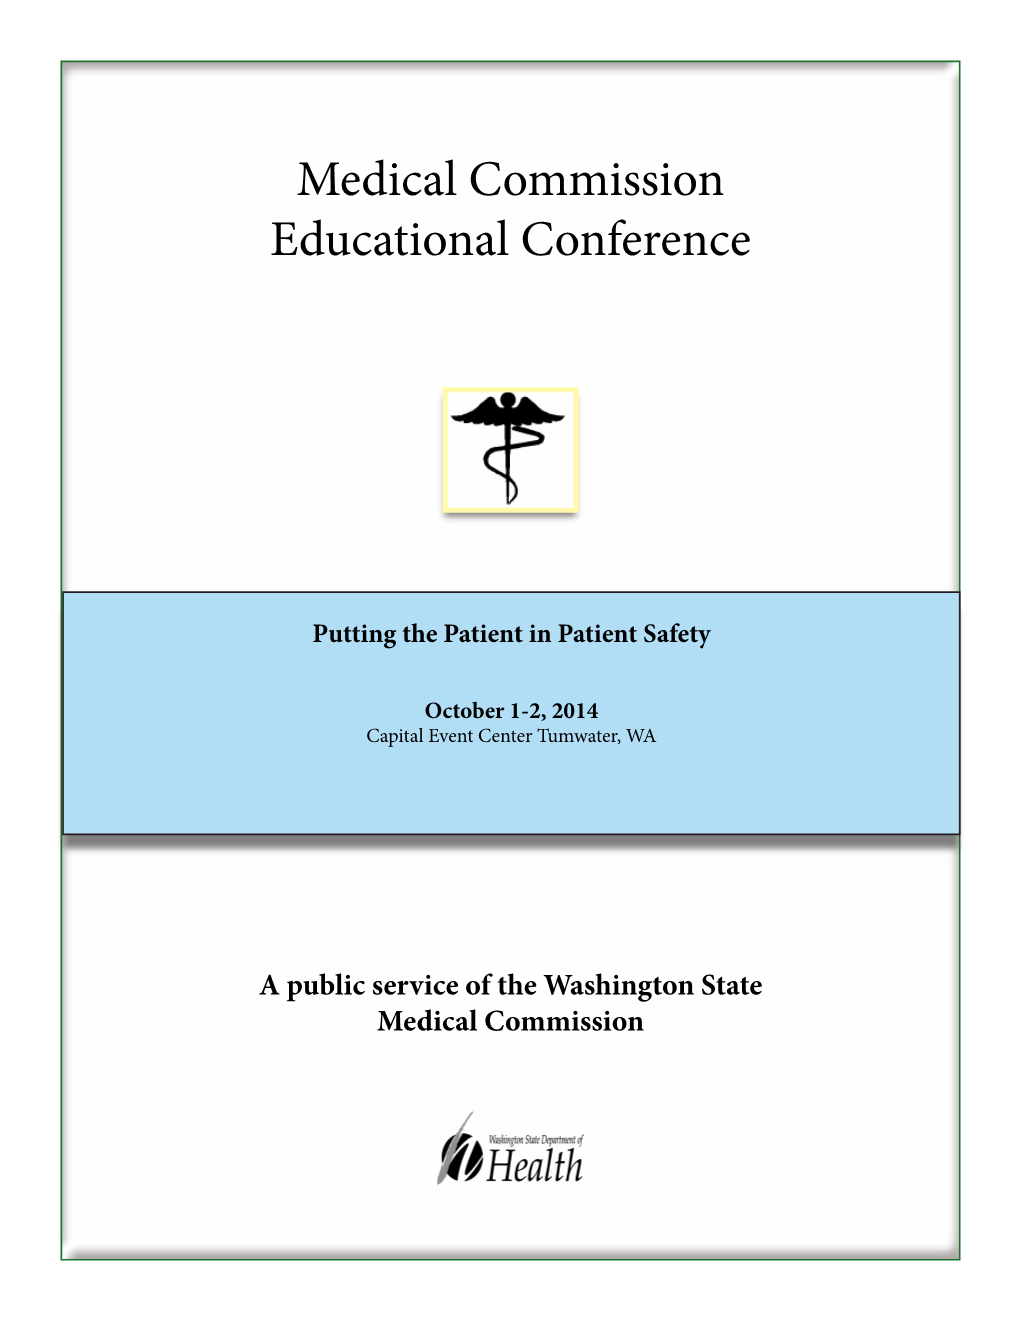 Medical Commission Conference E-Book 2014